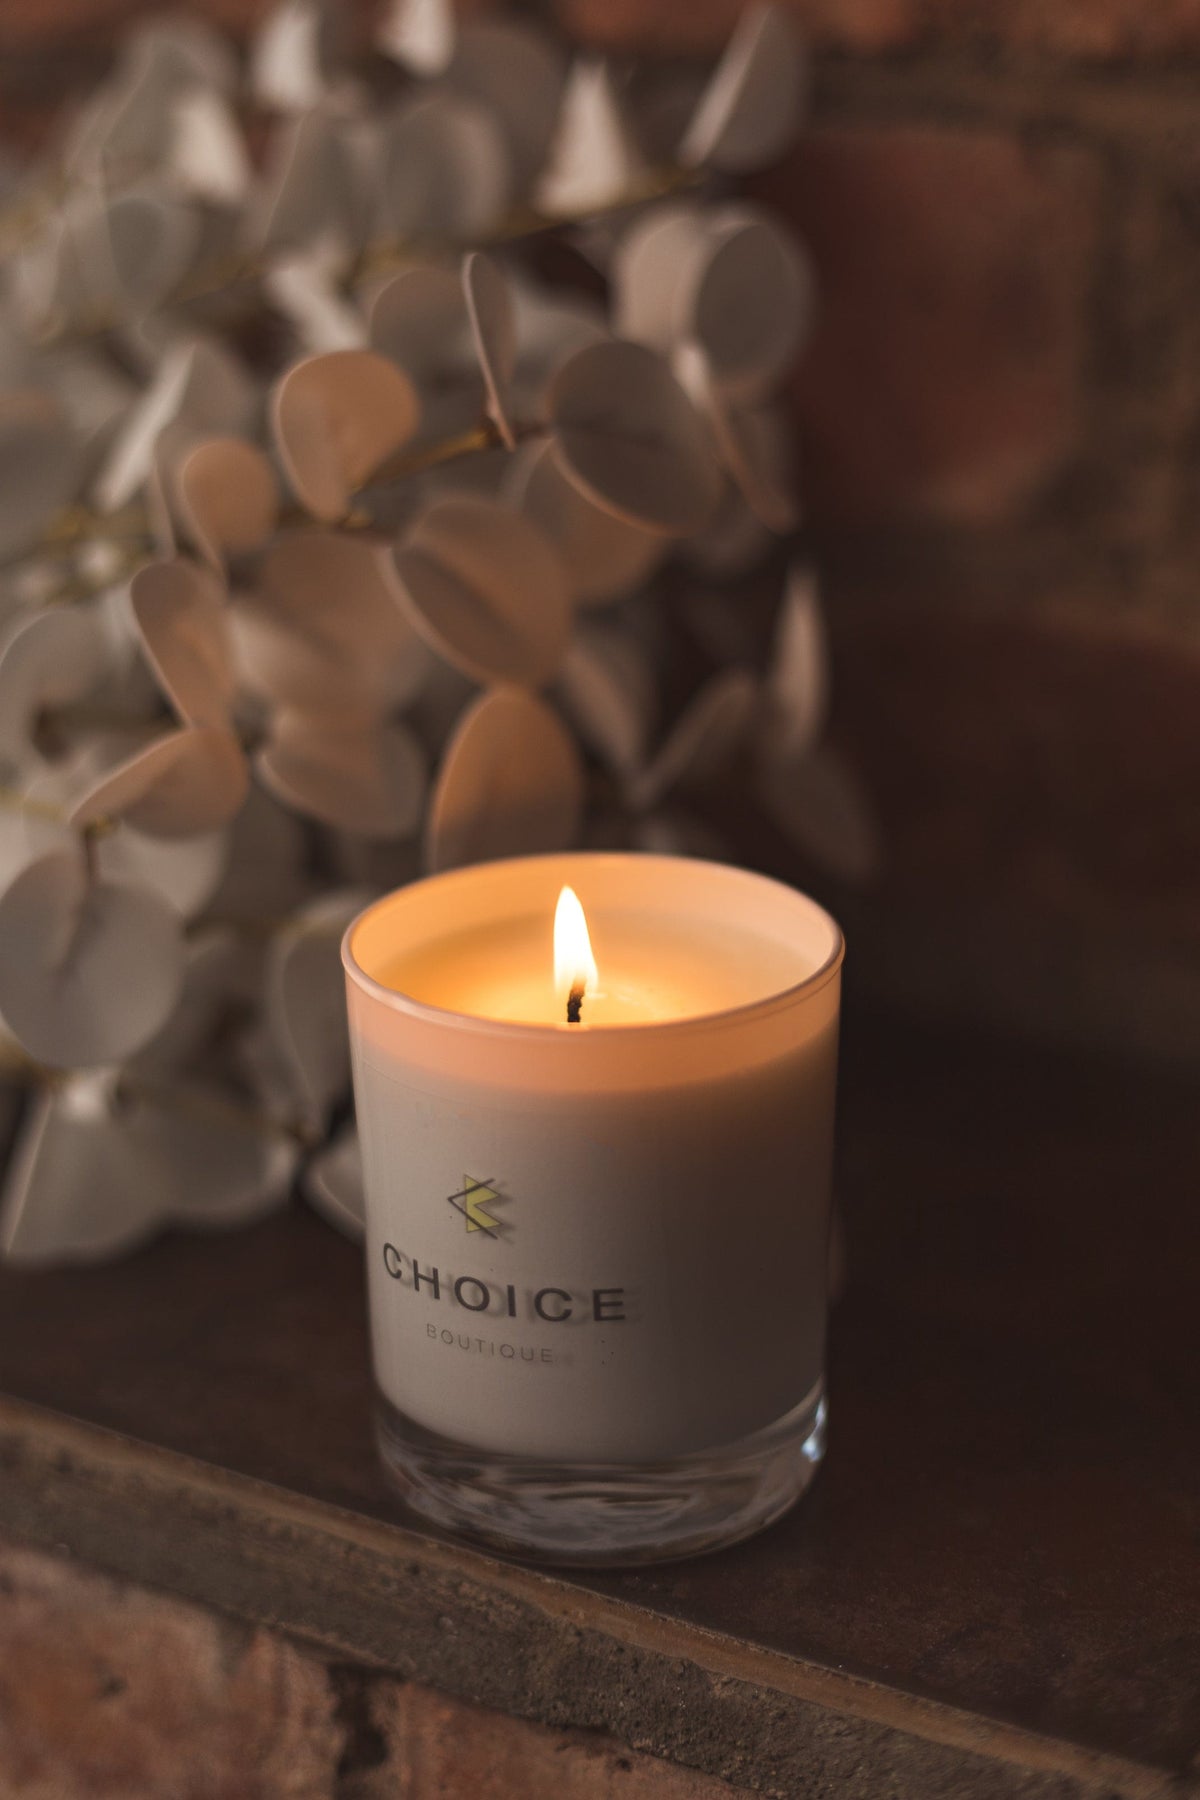 Choice Boutique Hand Poured Candle